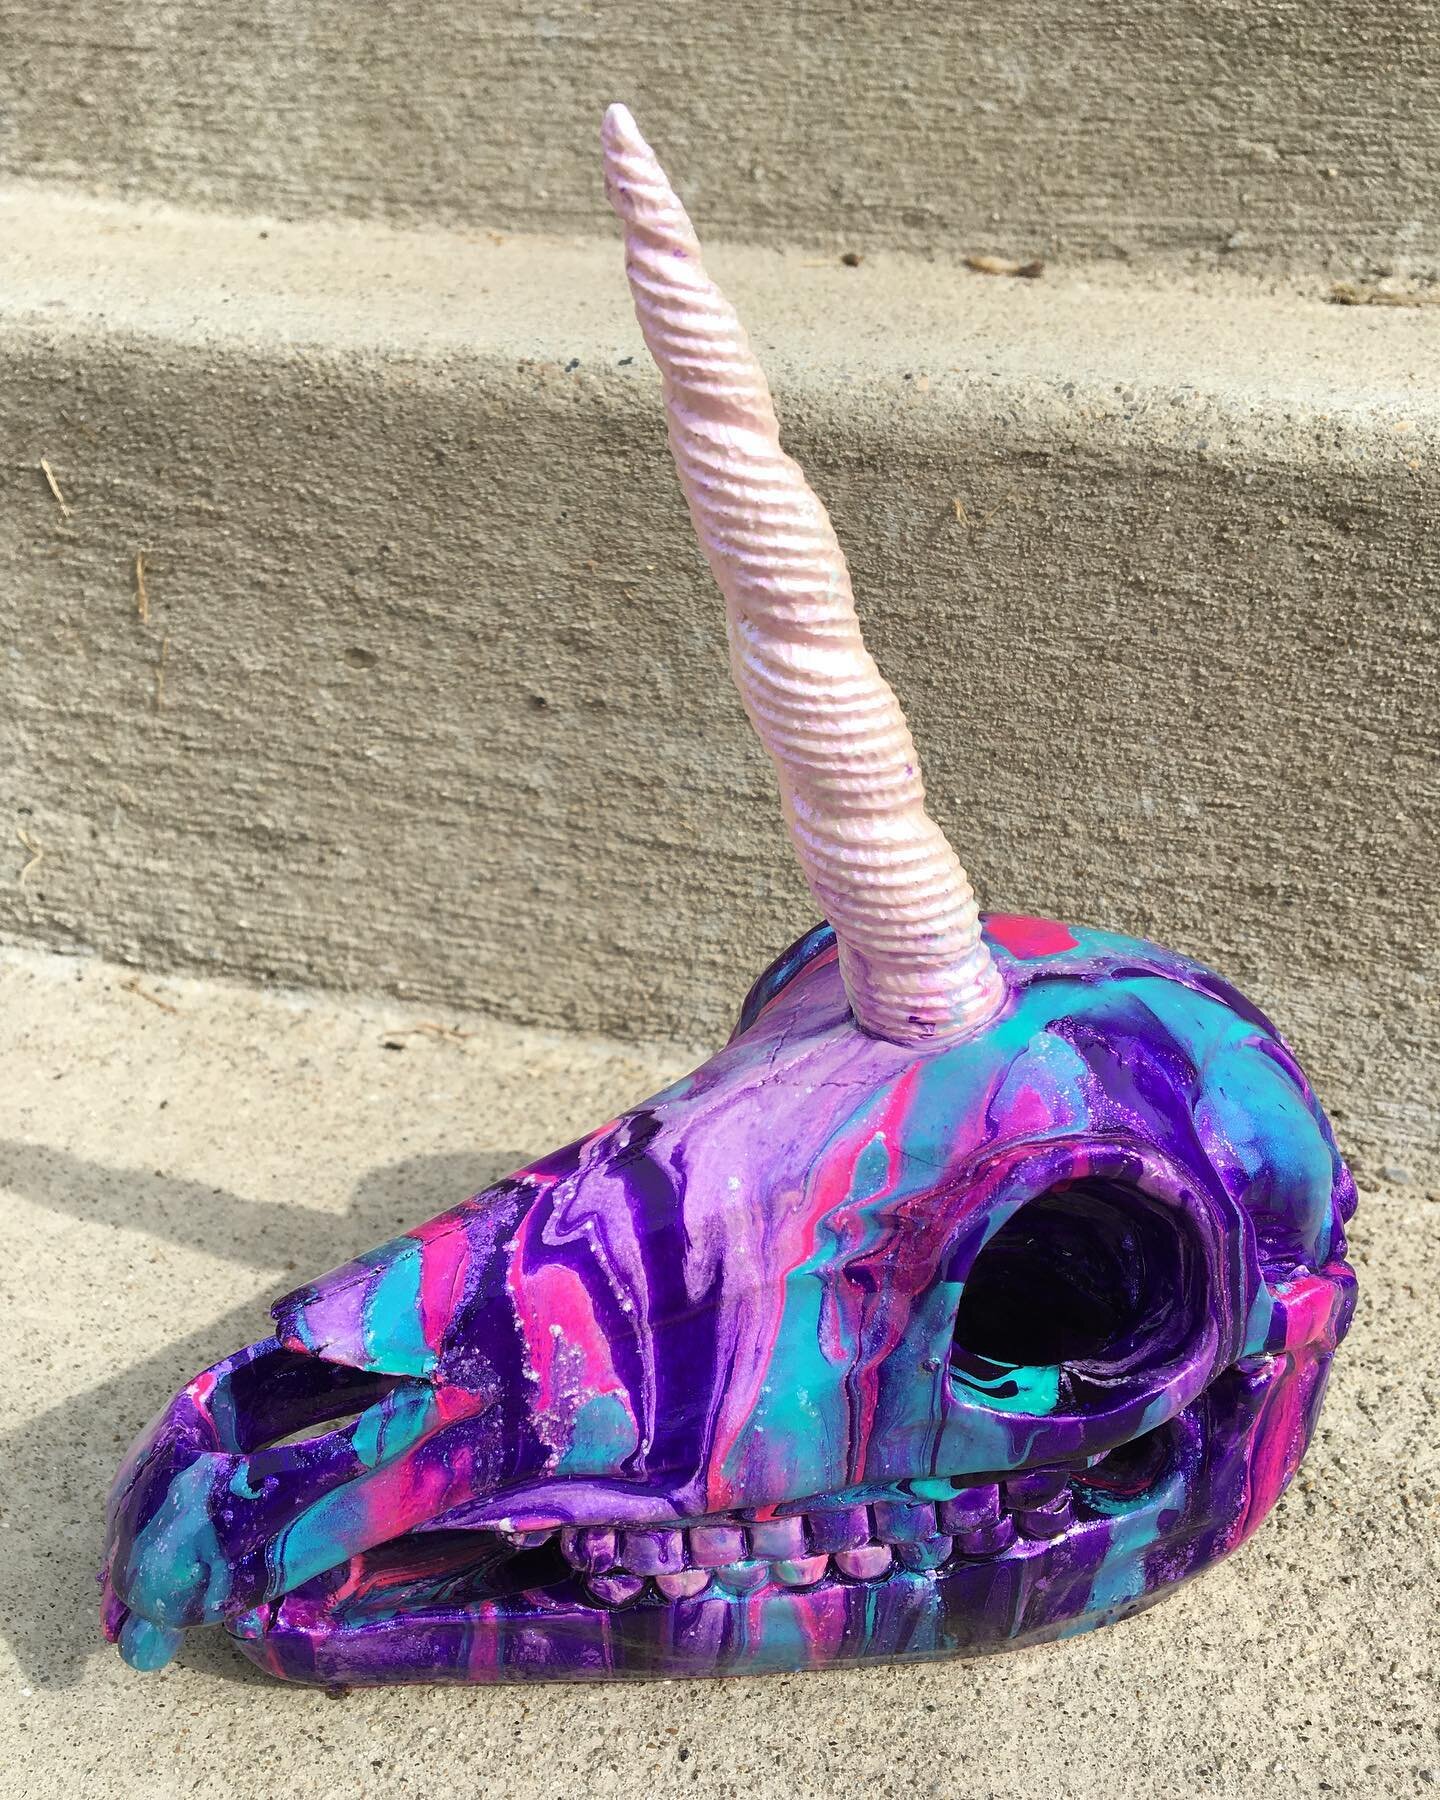 Throwback to the #benavonfallfestival and this glorious shimmery unicorn skull that sold right away! 🤩

#skull #skullart #unicorn #unicornskull #whimsical #macabre #sparkle #acrylicpouring #acrylicpour #acrylicpourart #fluidart #iradescent #pghartis